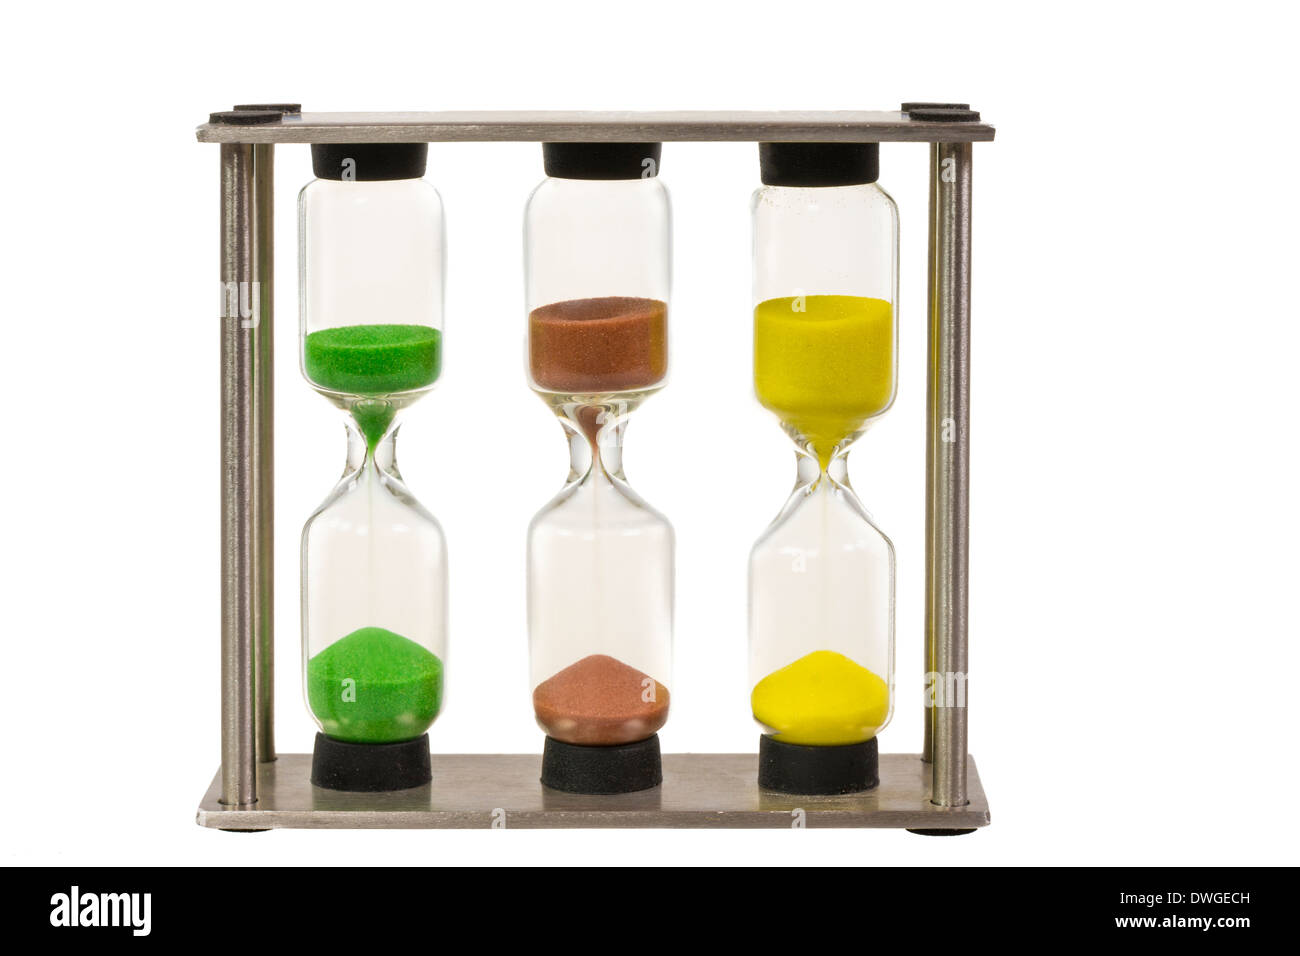 Time measurement with an isolated sandglass. Stock Photo